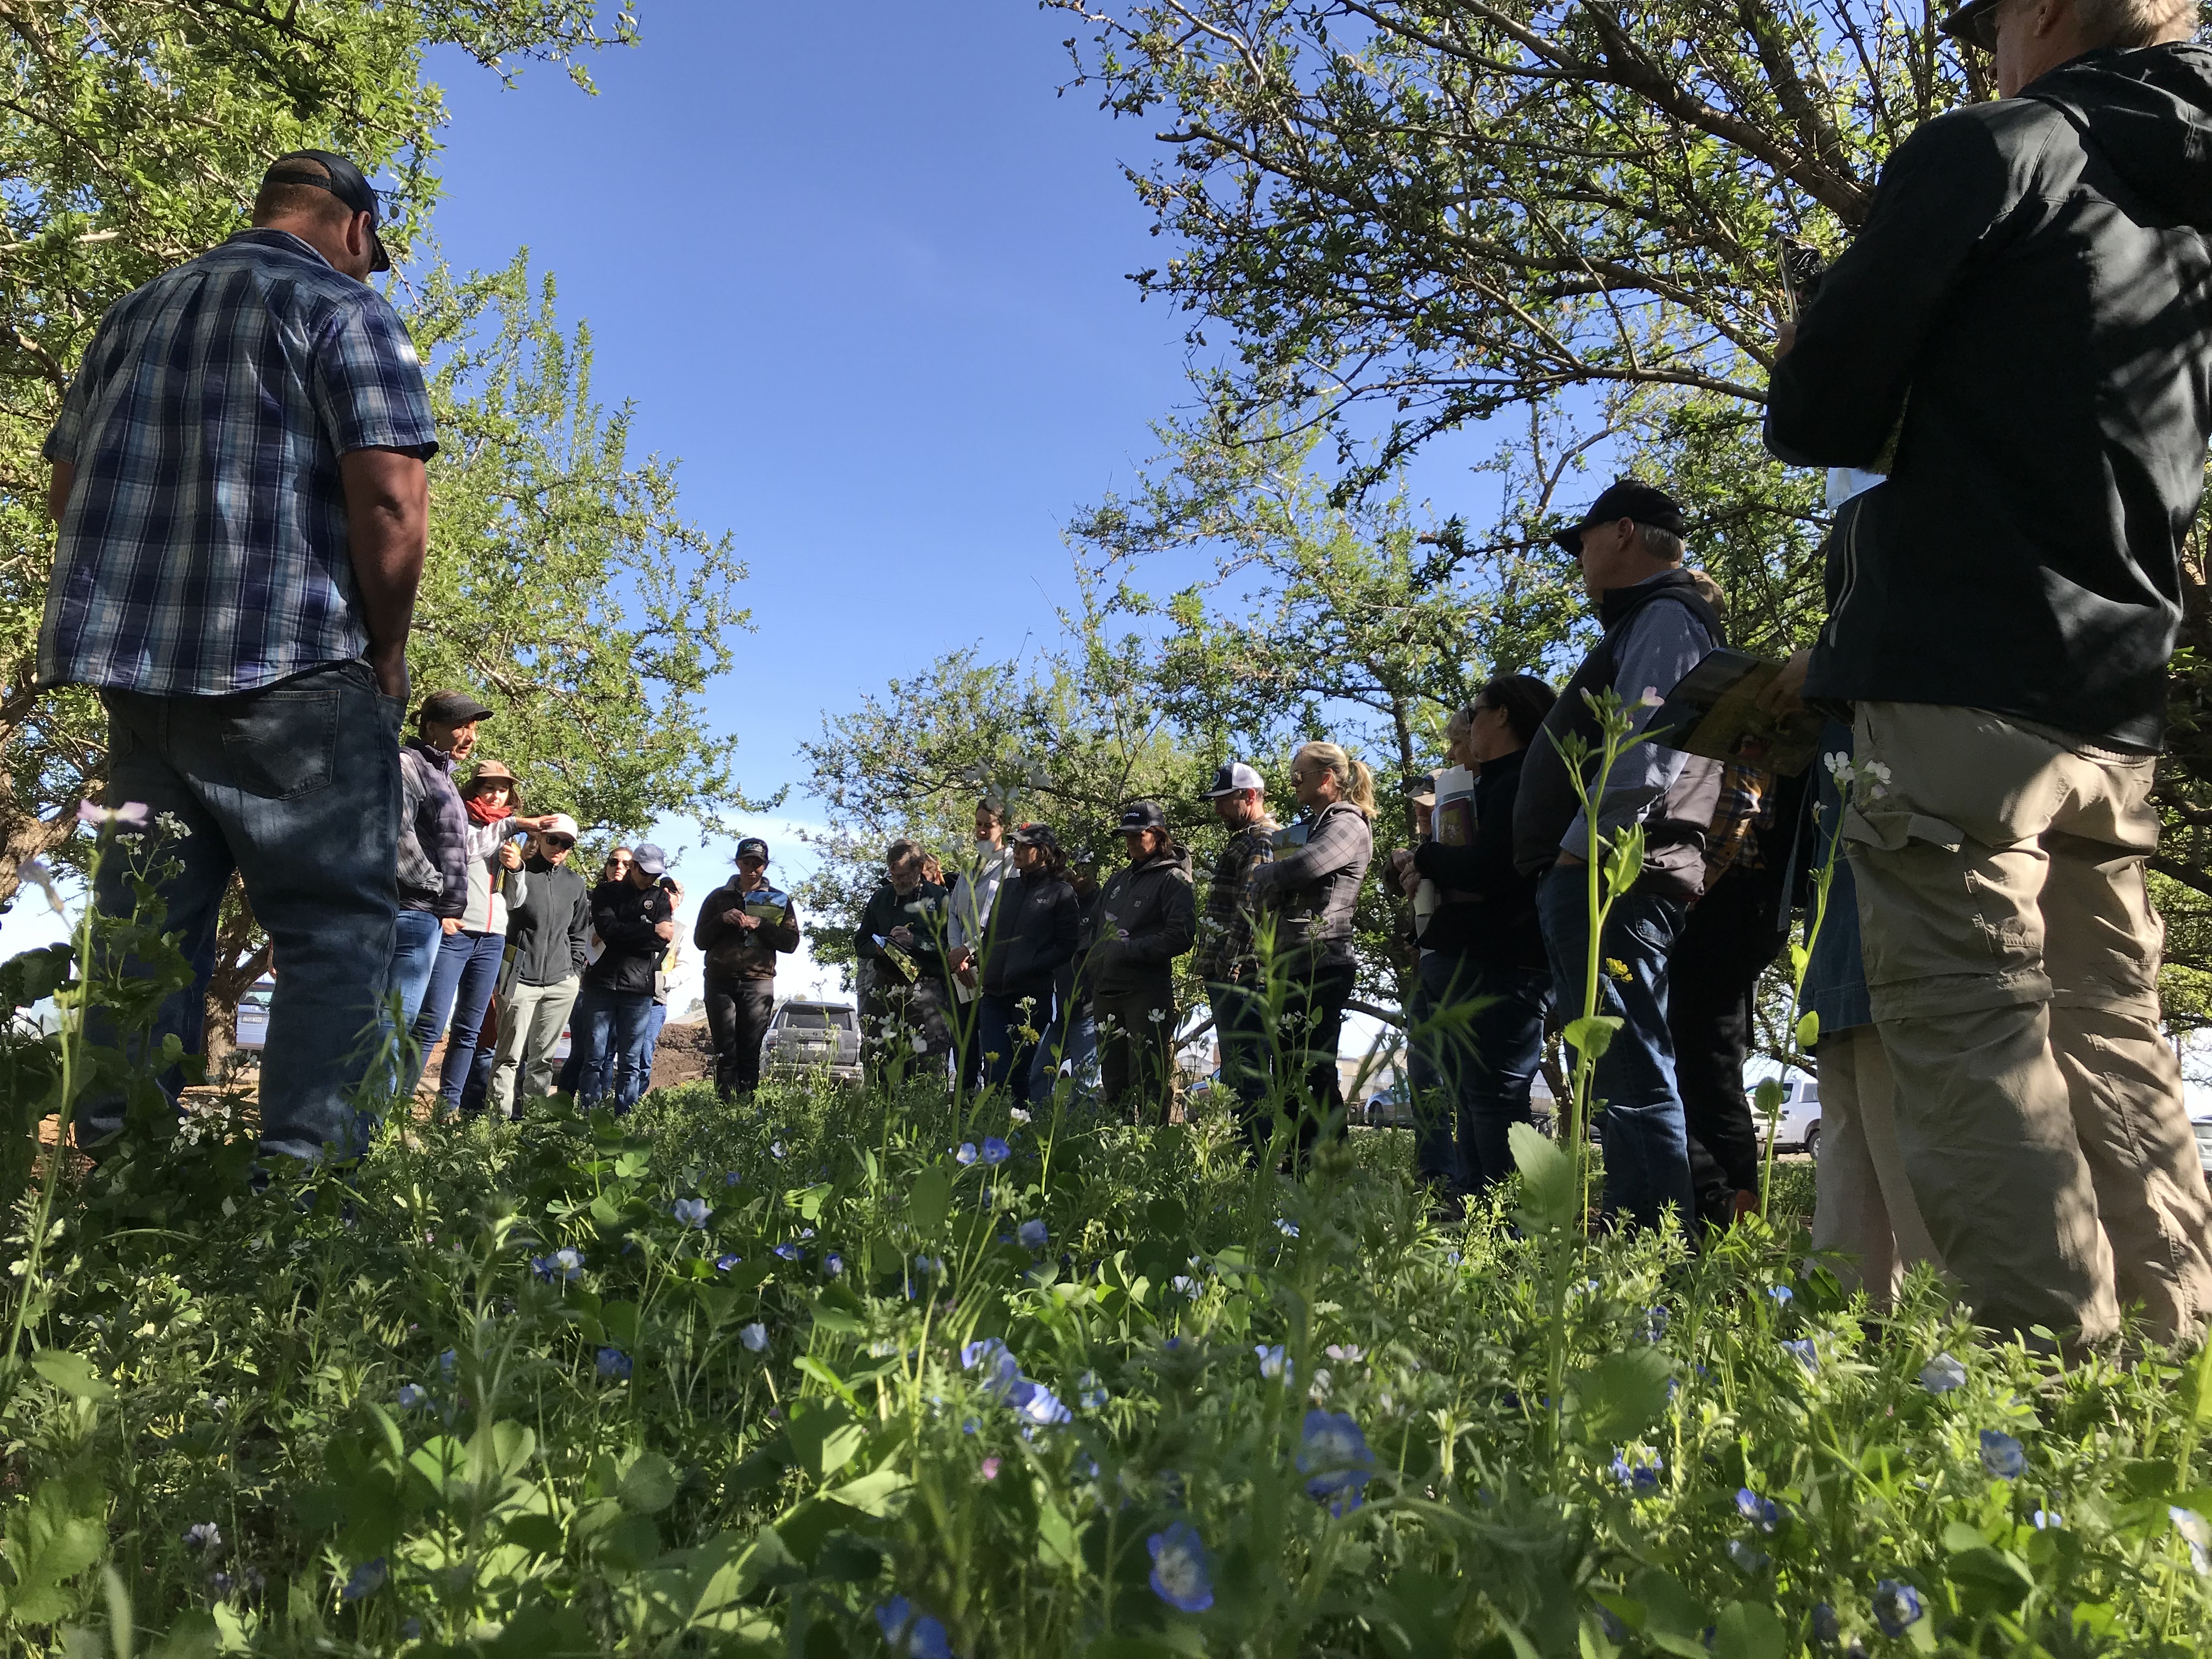 A group of people listen to a woman standing in the middle, presenting. They are in an orchard with flowering cover crops.